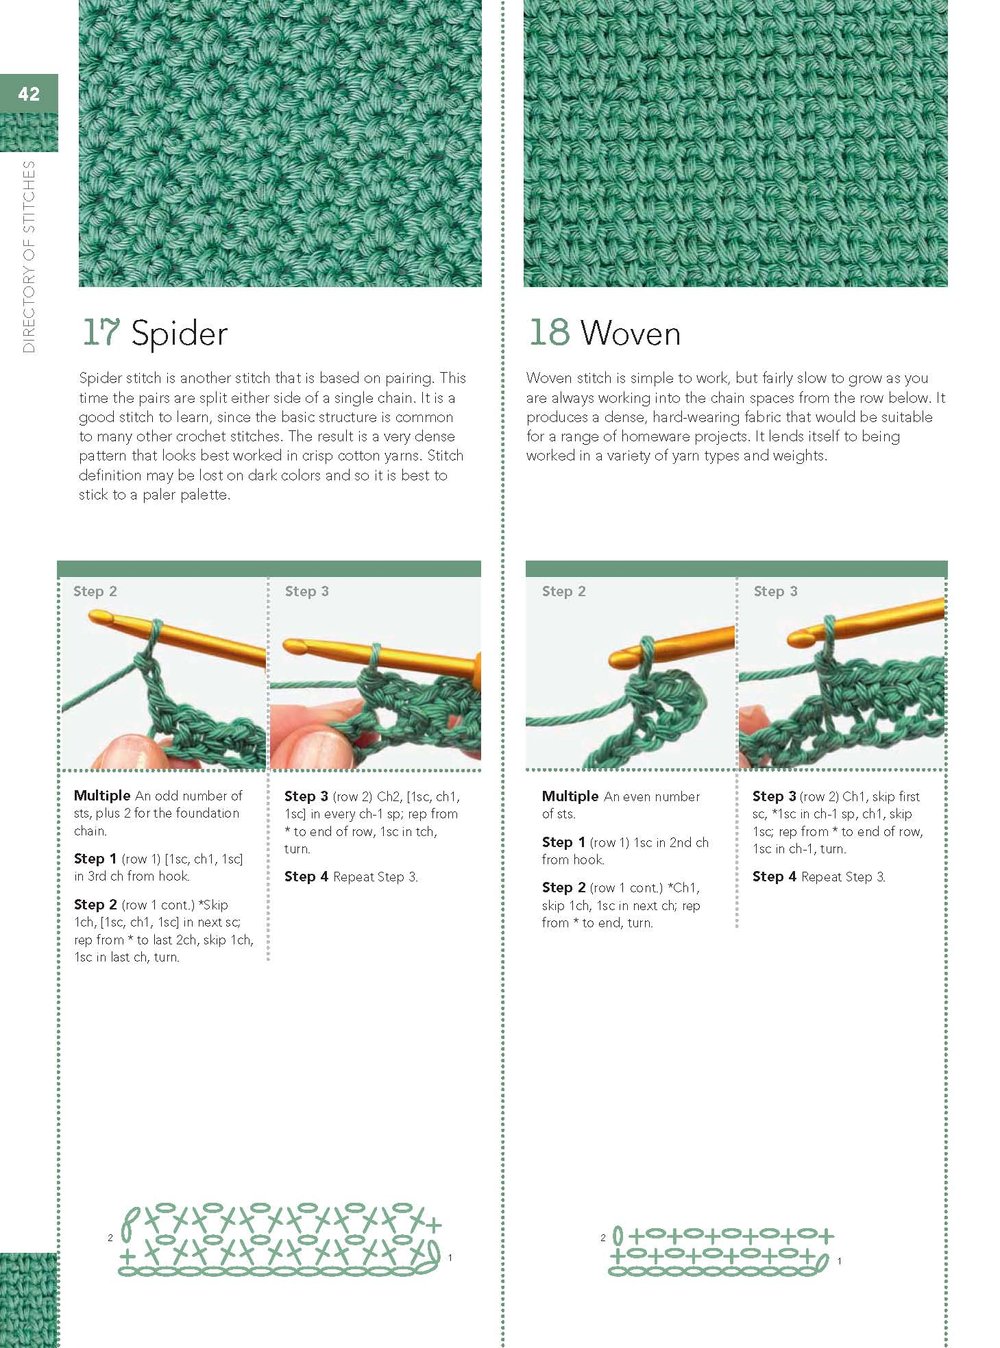 Review - Crochet Every Way Stitch Dictionary